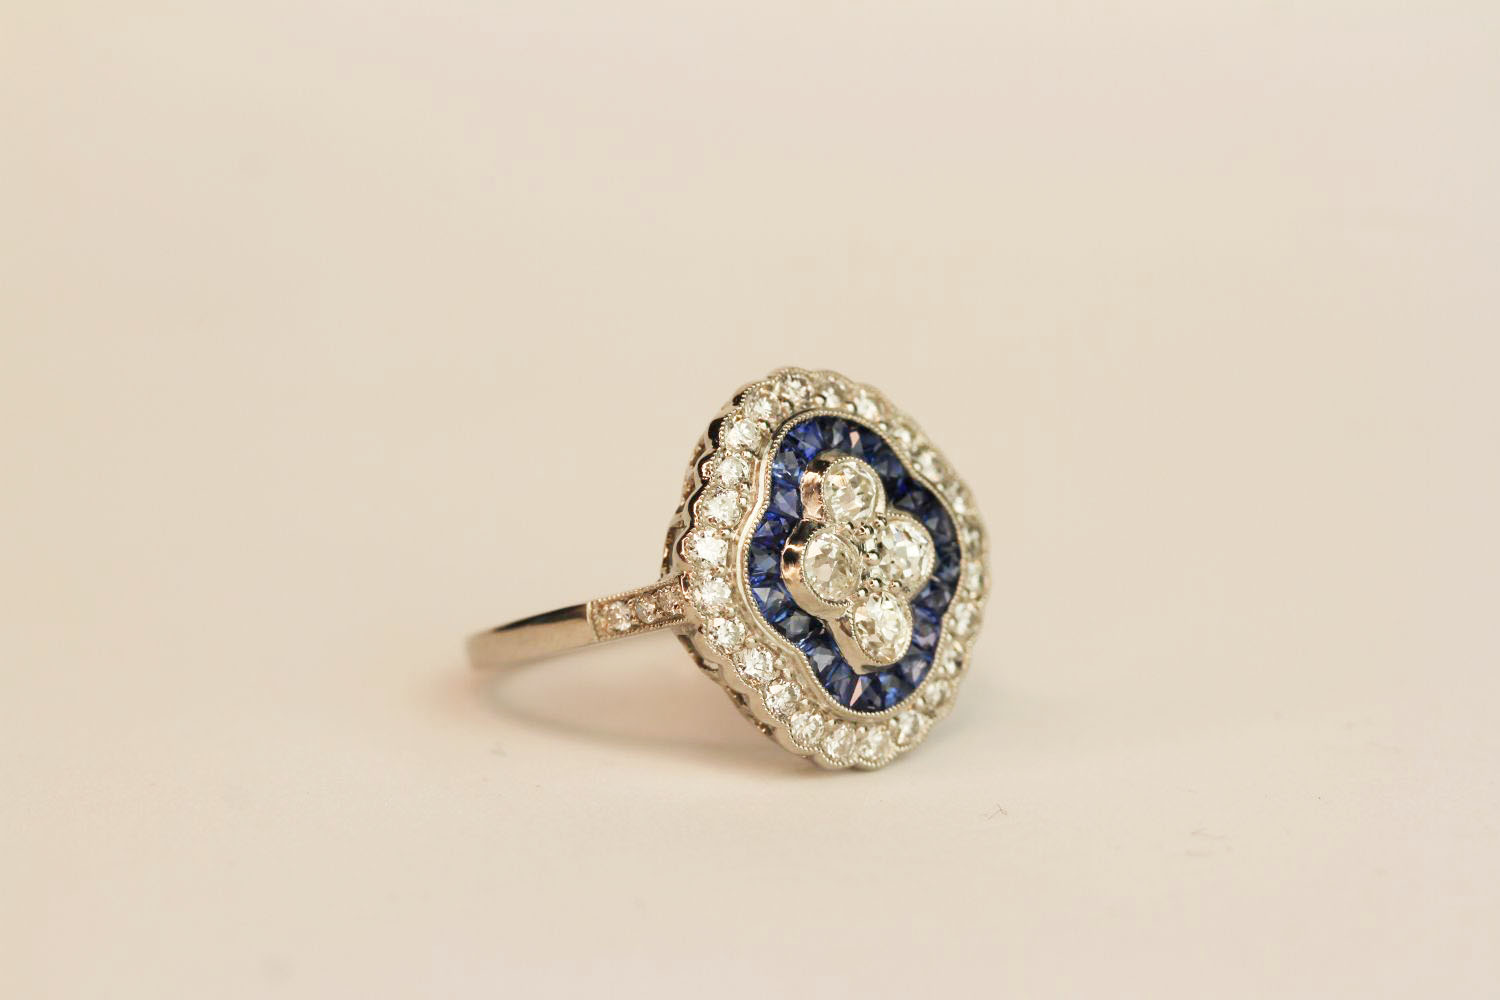 Platinum sapphire and diamond ring. Set with 4 central diamonds, surrounded by an inner halo of - Image 2 of 3